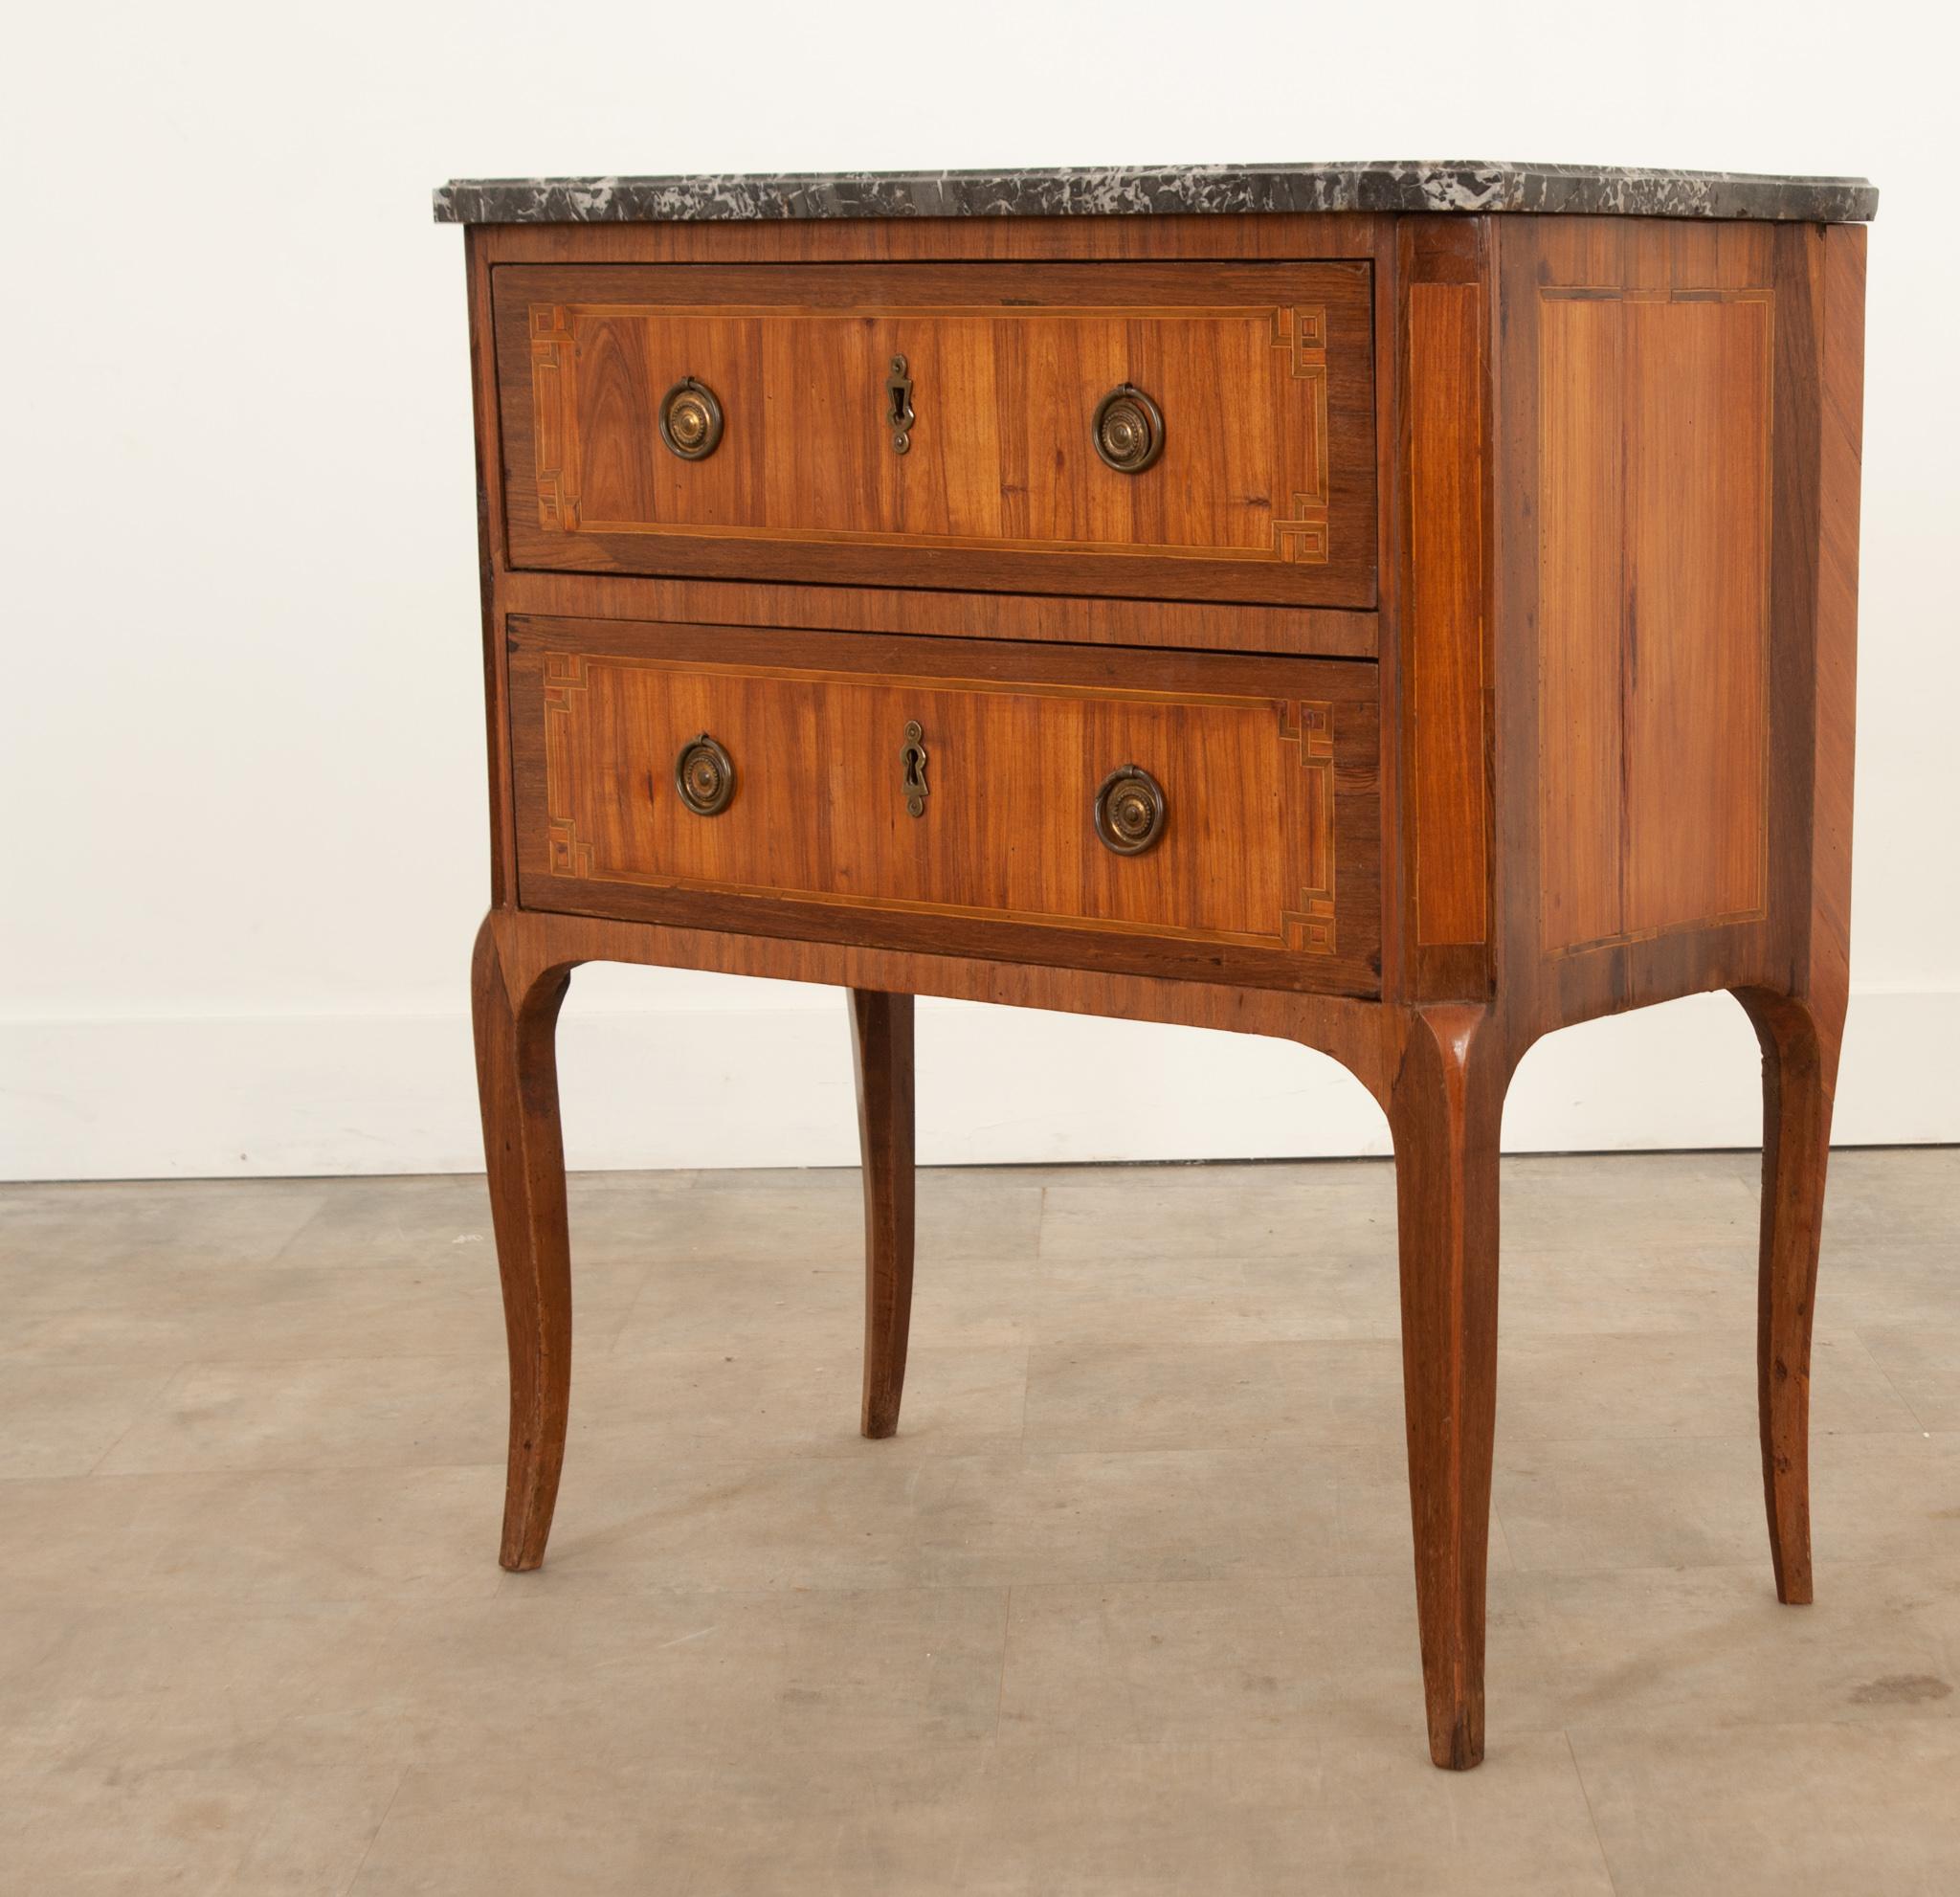 A great petite inlay commode from 19th century France. Topped with a shaped piece of marble that is removable.Canted corners and drawer fronts showcase the geometric inlay design. Cast brass drop ring pulls make it easy to open the drawers. No keys